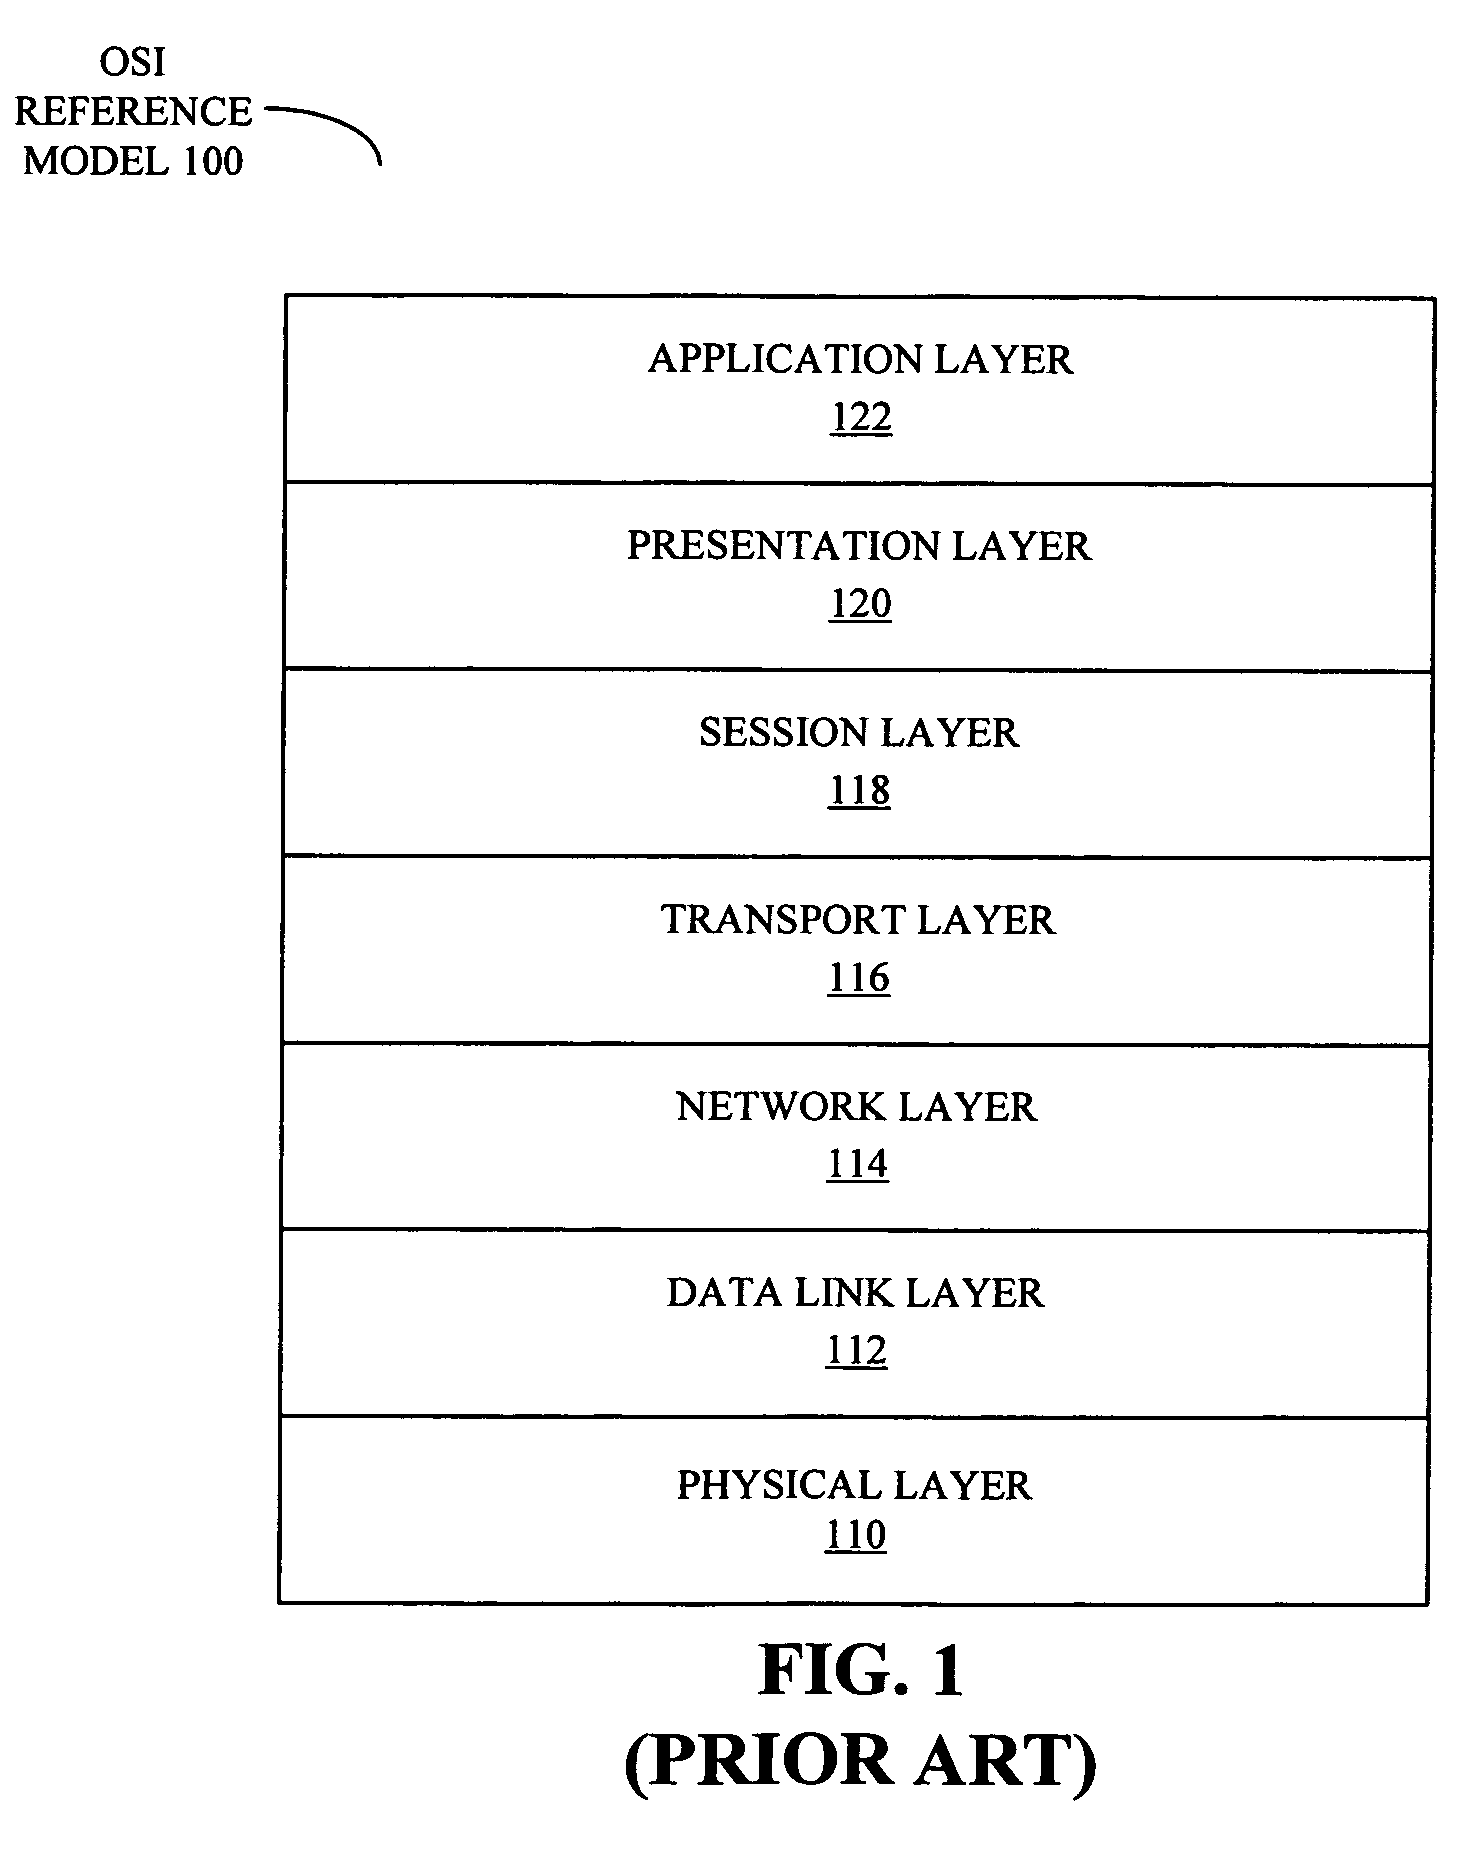 Routing based on dynamic classification rules